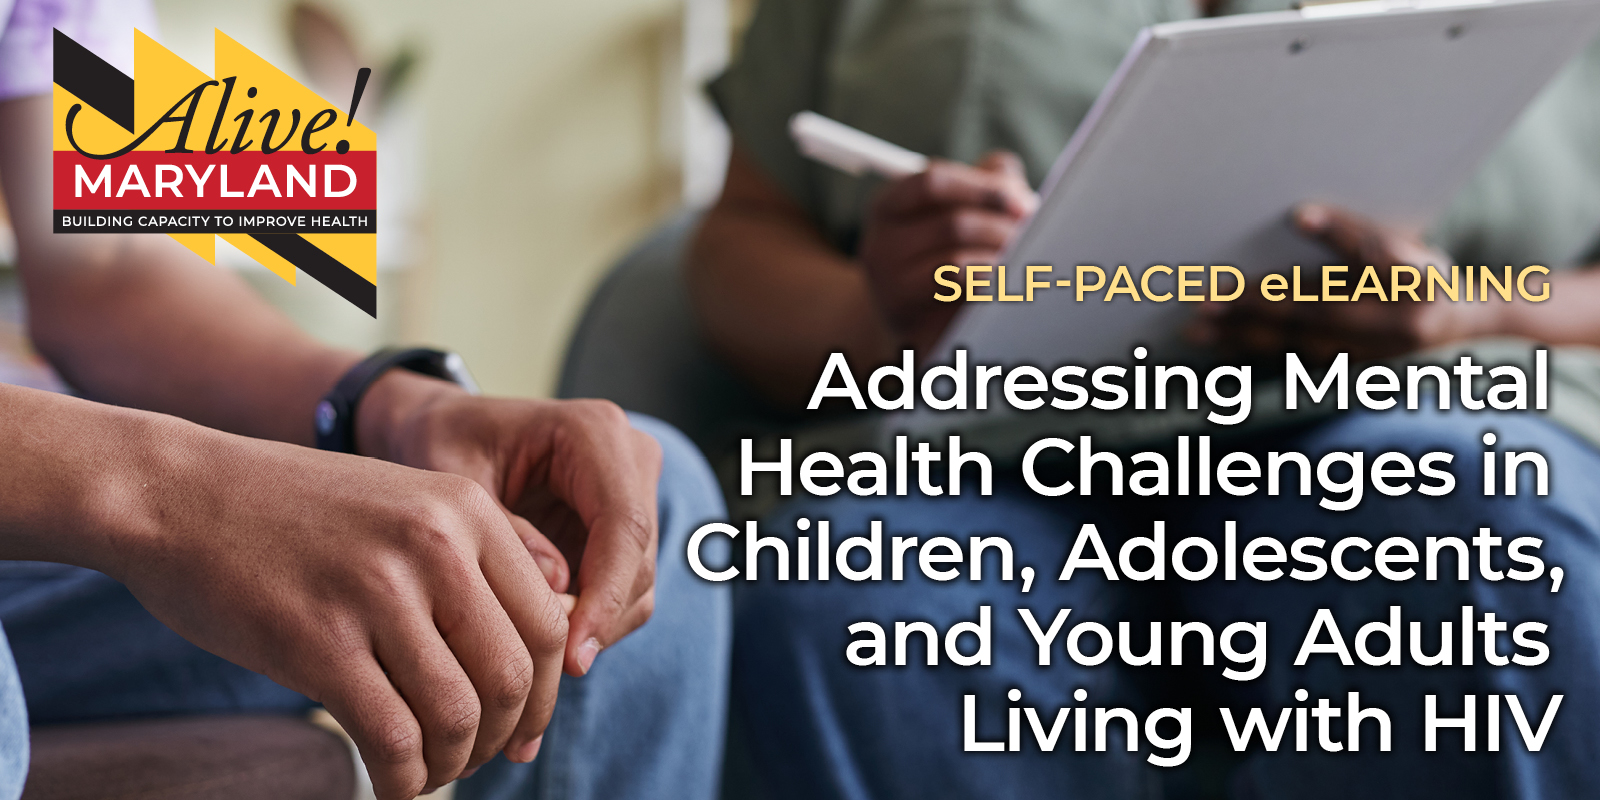 Addressing Mental Health Challenges in Children, Adolescents, and Young Adults Living with HIV